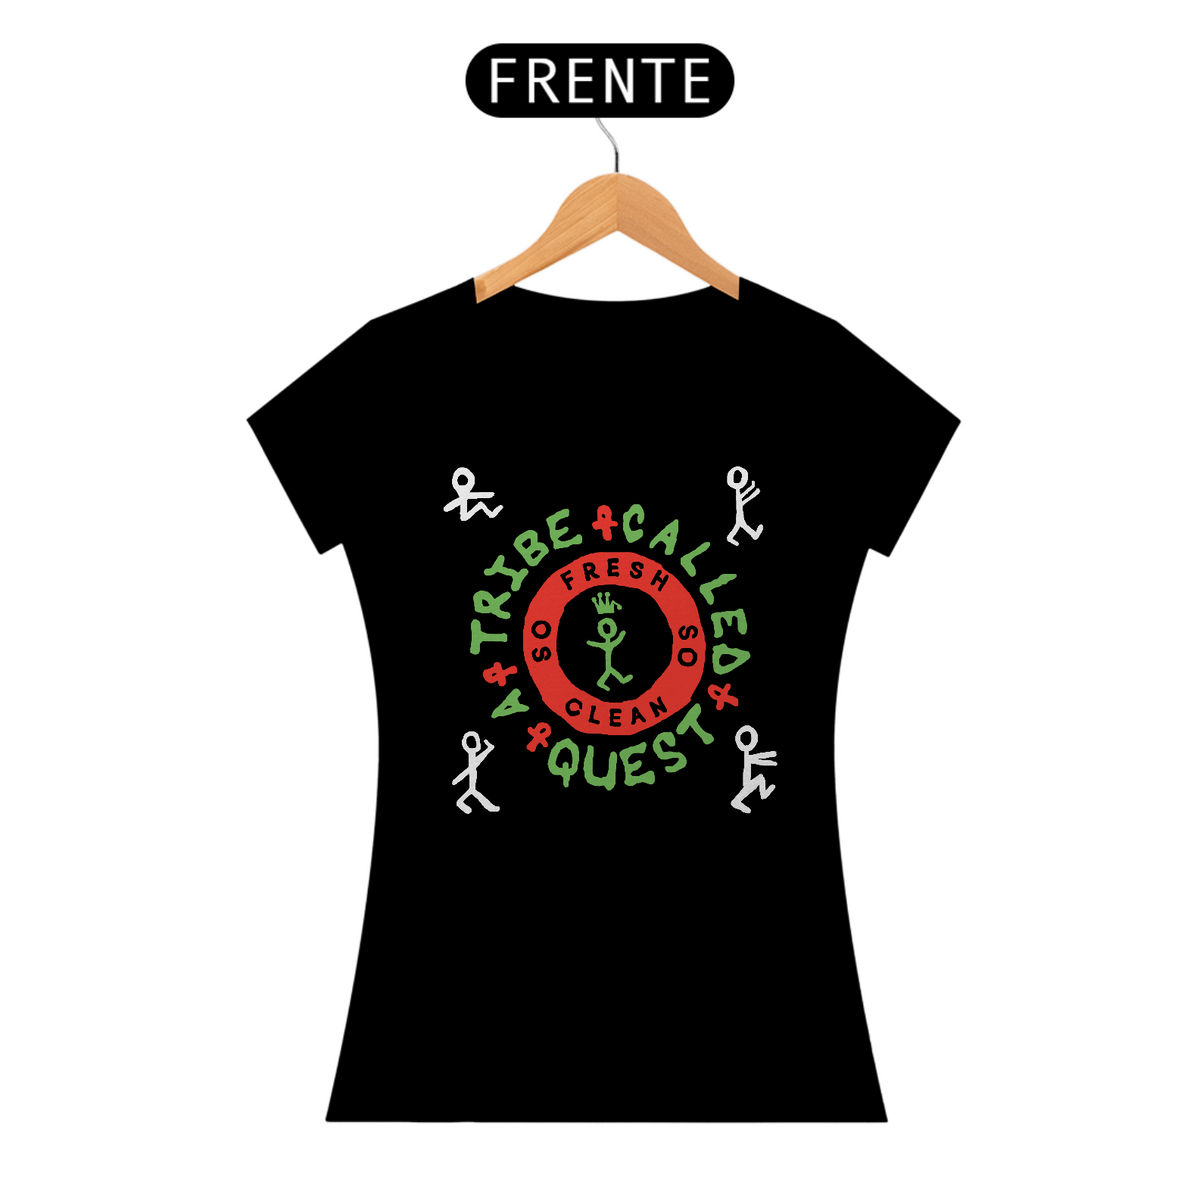 Nome do produto: A Tribe Called Quest - Baby Look